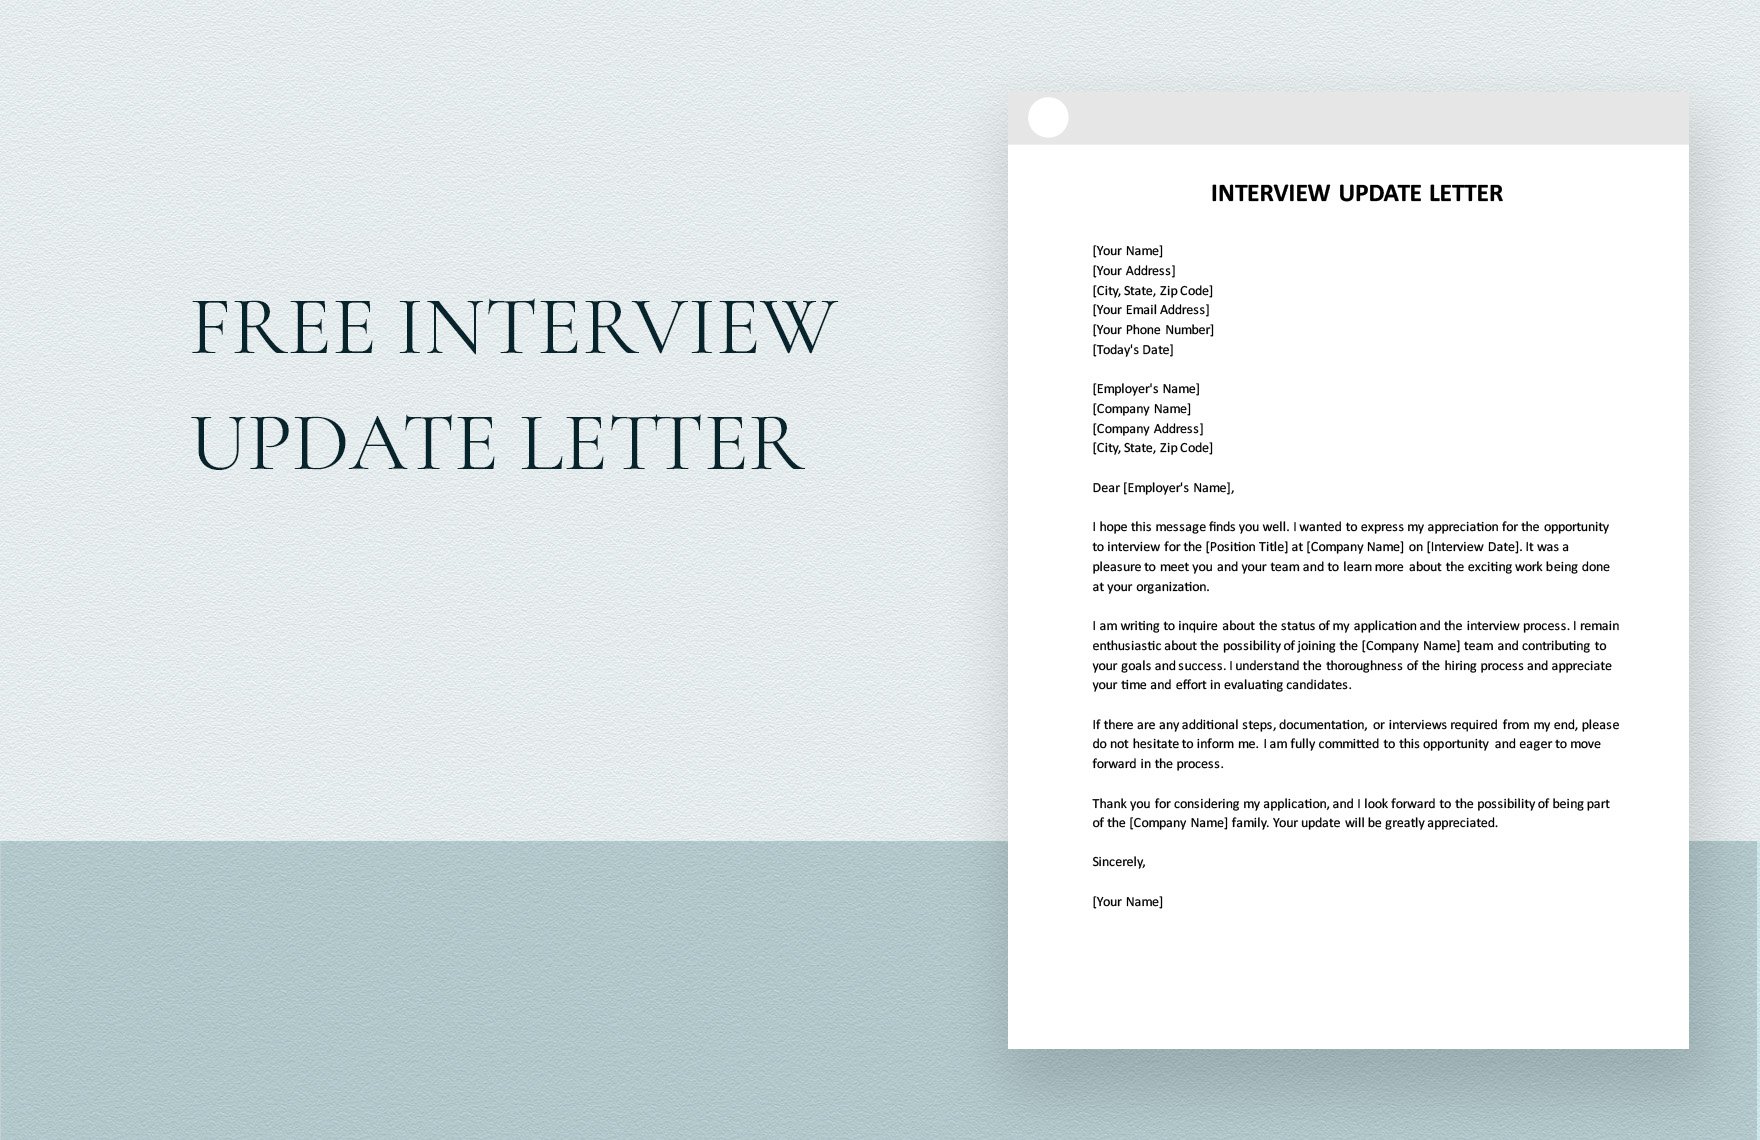 Free Interview Update Letter